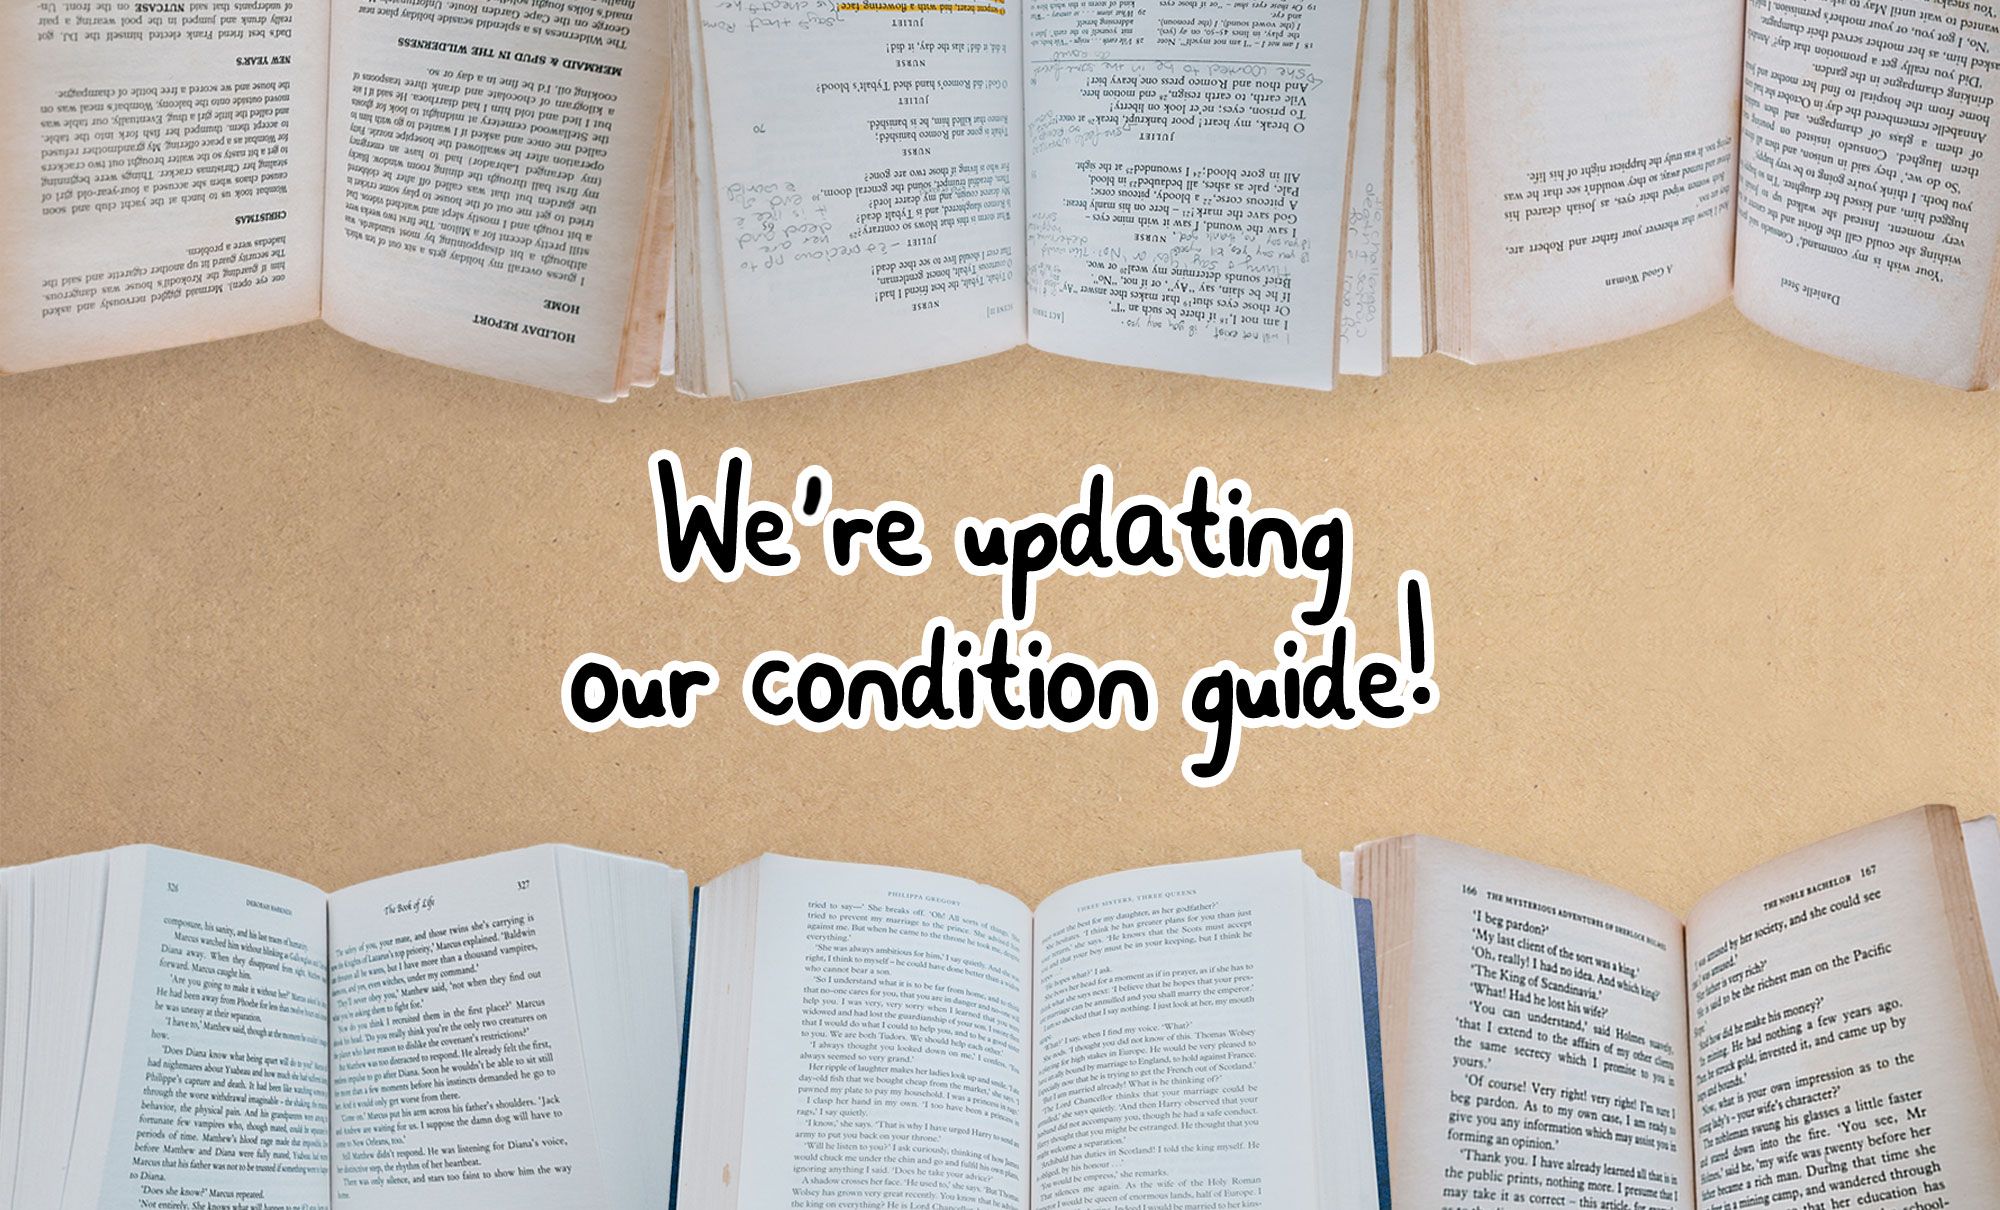 Updates to our condition guide